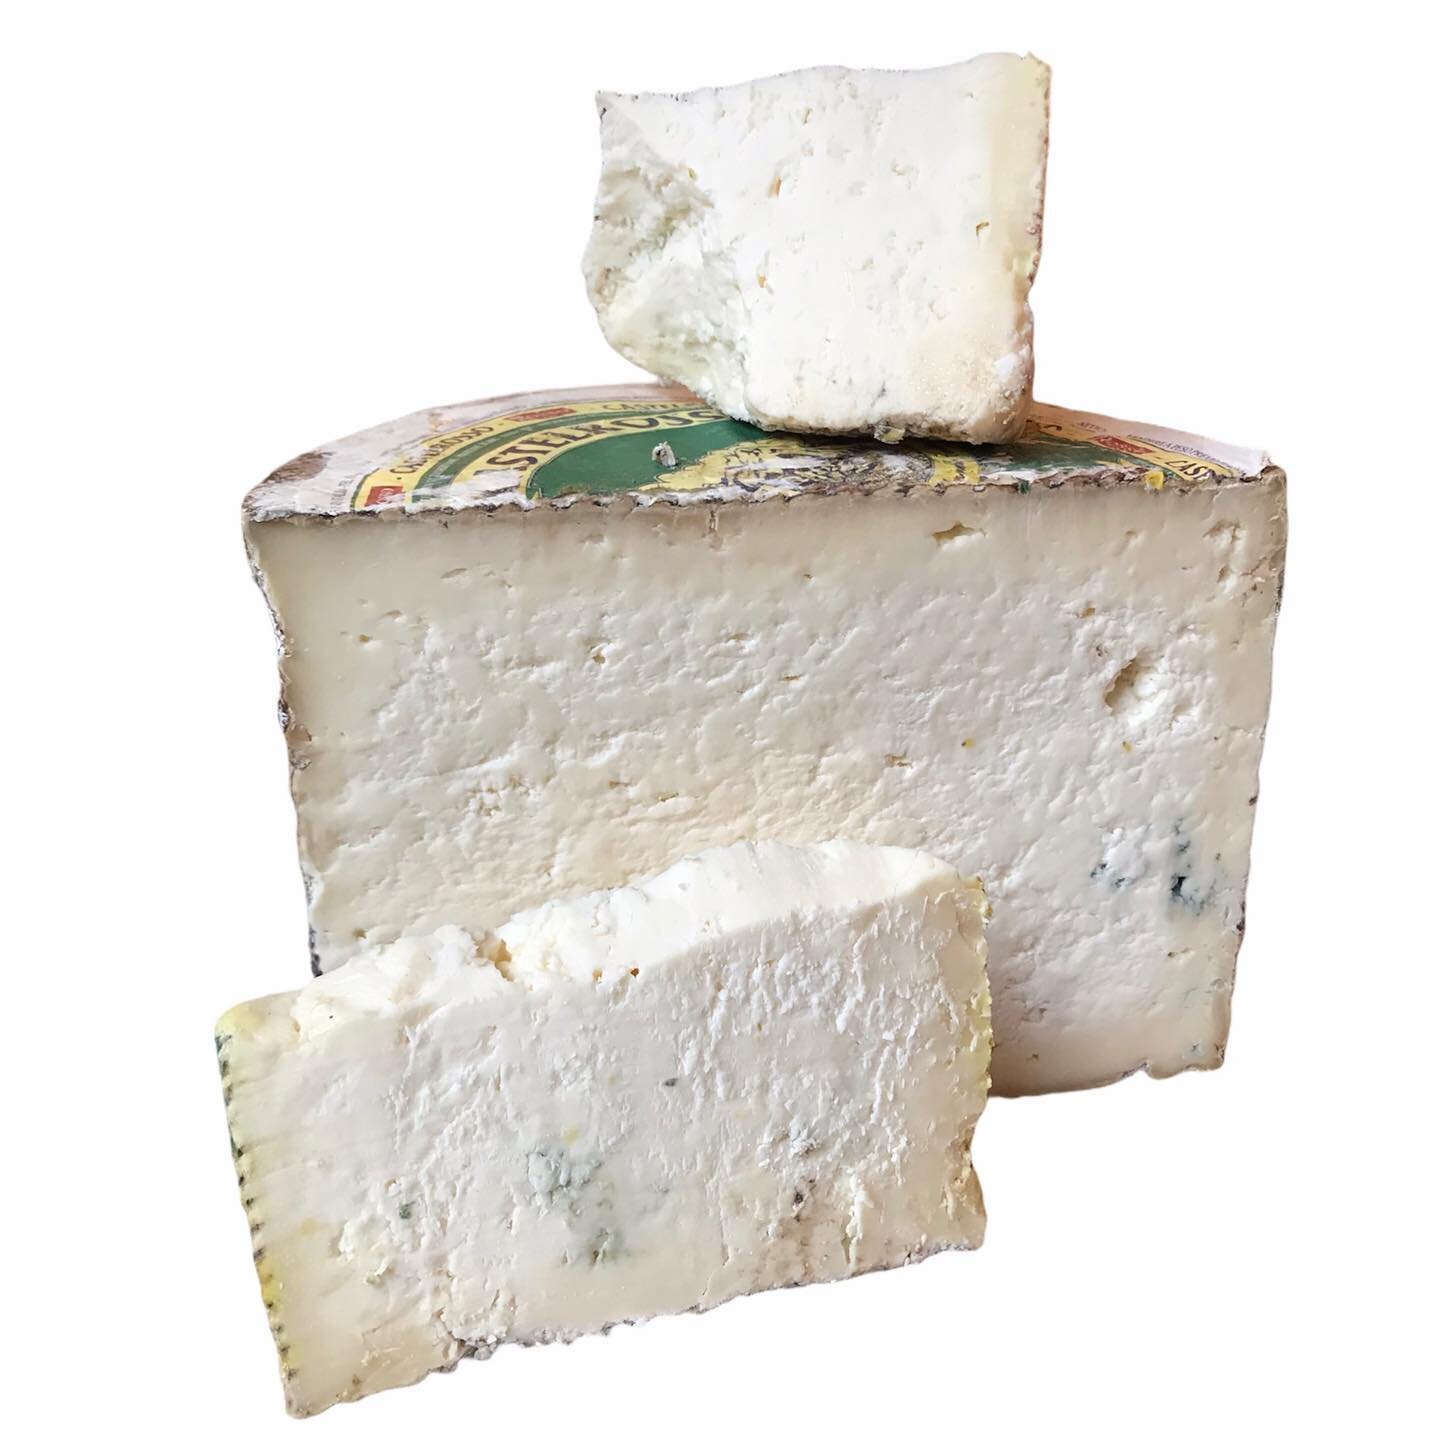 Castelrosso is a cheese with semi hard crumbly texture, obtained from whole pasteurised cows milk and left to acidify , the flavour is delicate and naturally marbled when ripe, from the North East of Italy 
Available now on our website #italiancheese